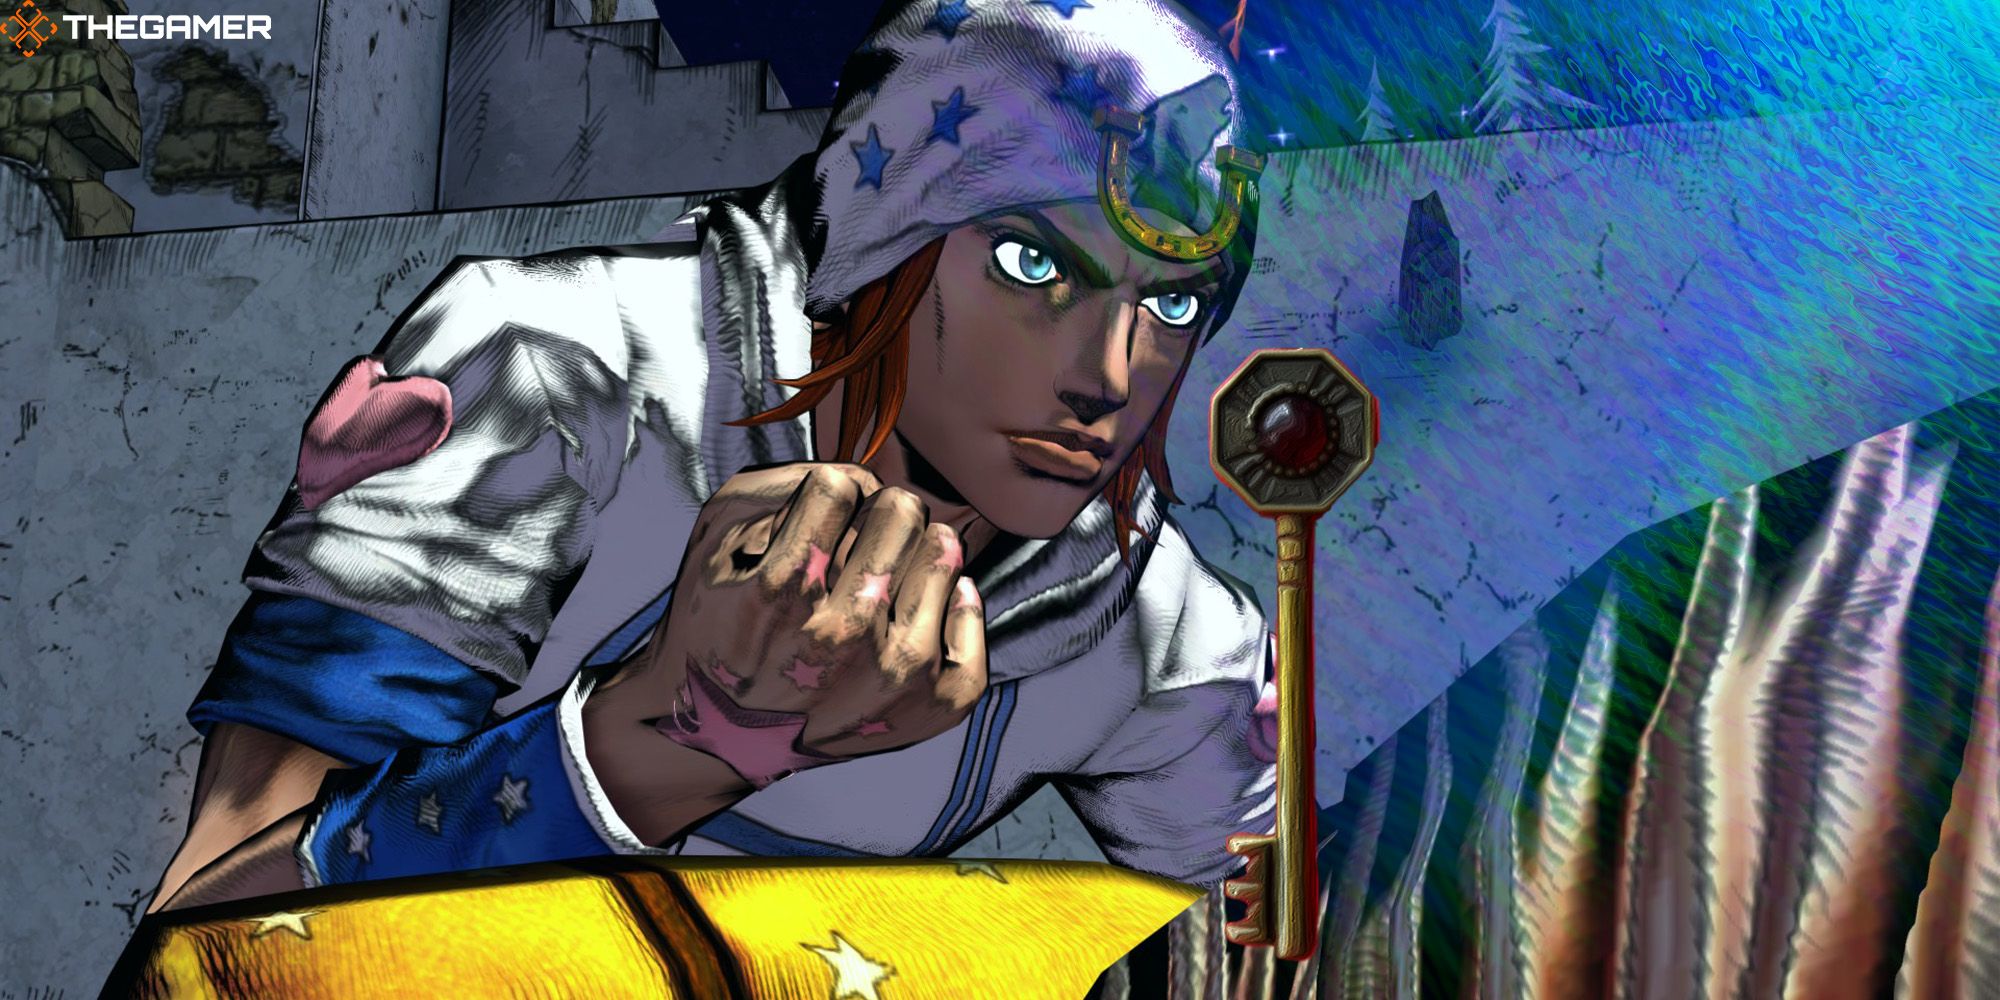 Johnny Joestar, on horseback, looks in the glow of northern lights. An image of a golden key sits in the foreground. Custom image for JoJo's Bizarre Adventure ASBR.